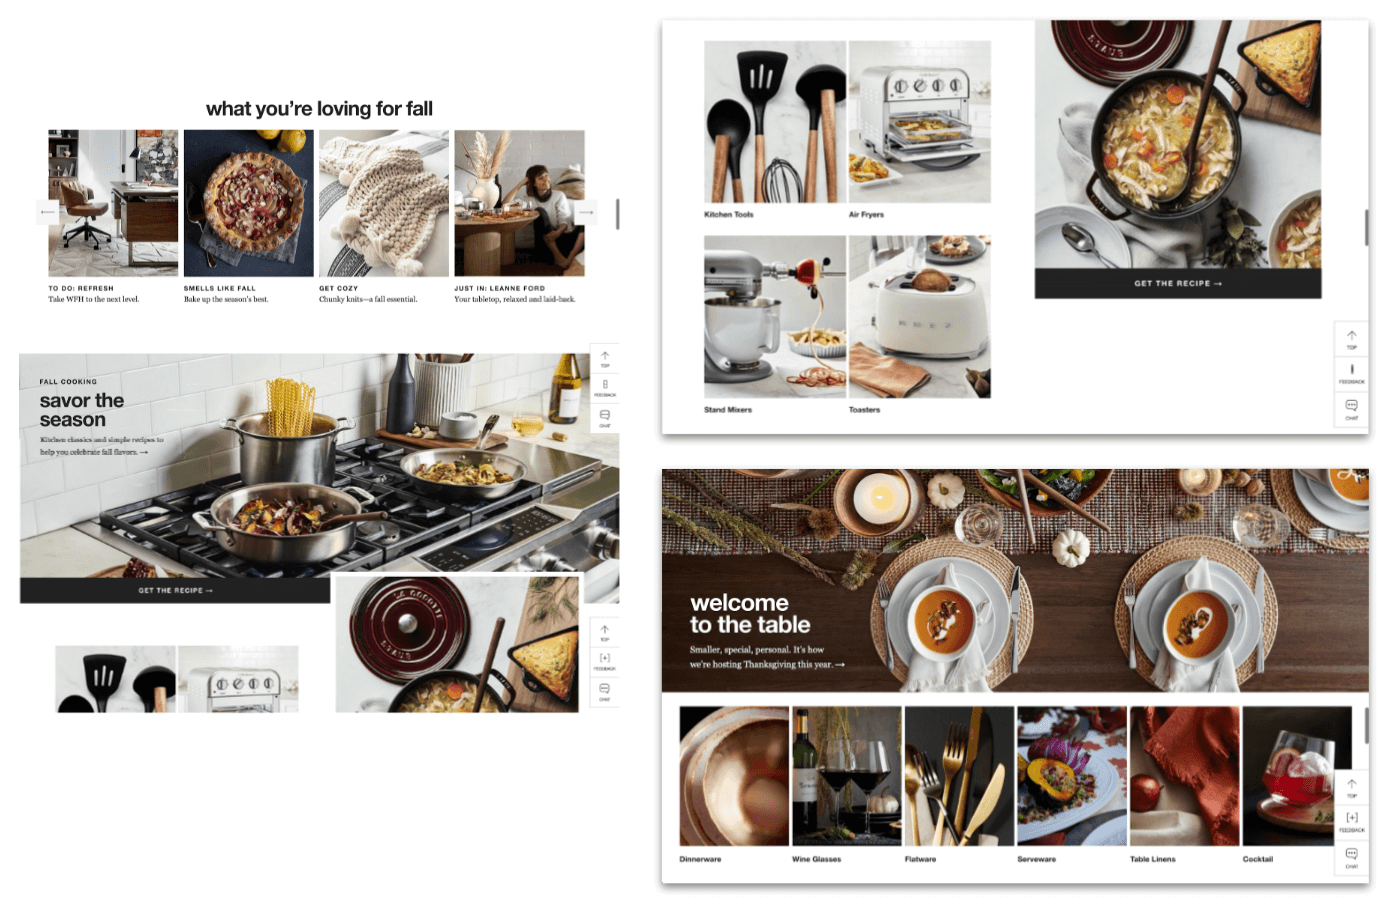 collection of screenshots of various sections of Crate and Barrel's editorial style homepage